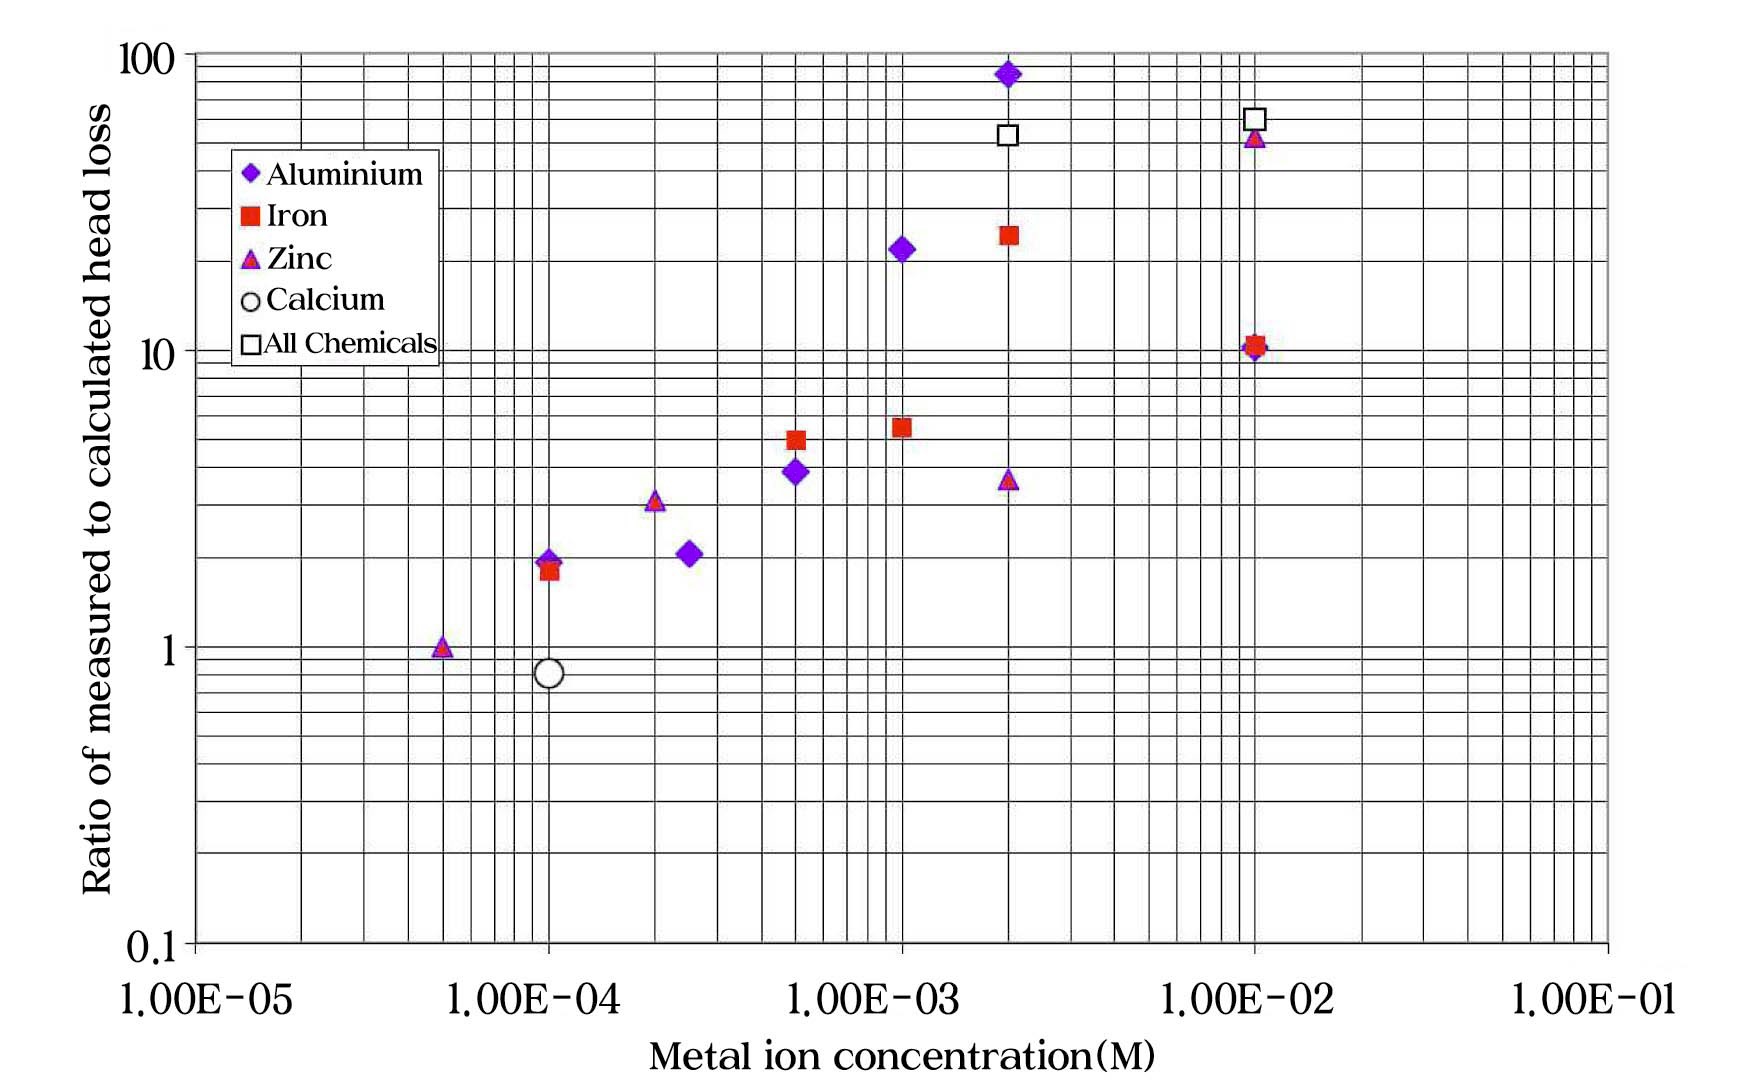 Ratio of Measured Head Loss with and without Chemical Precipitates as a Function of Metal ion Concentration [7].